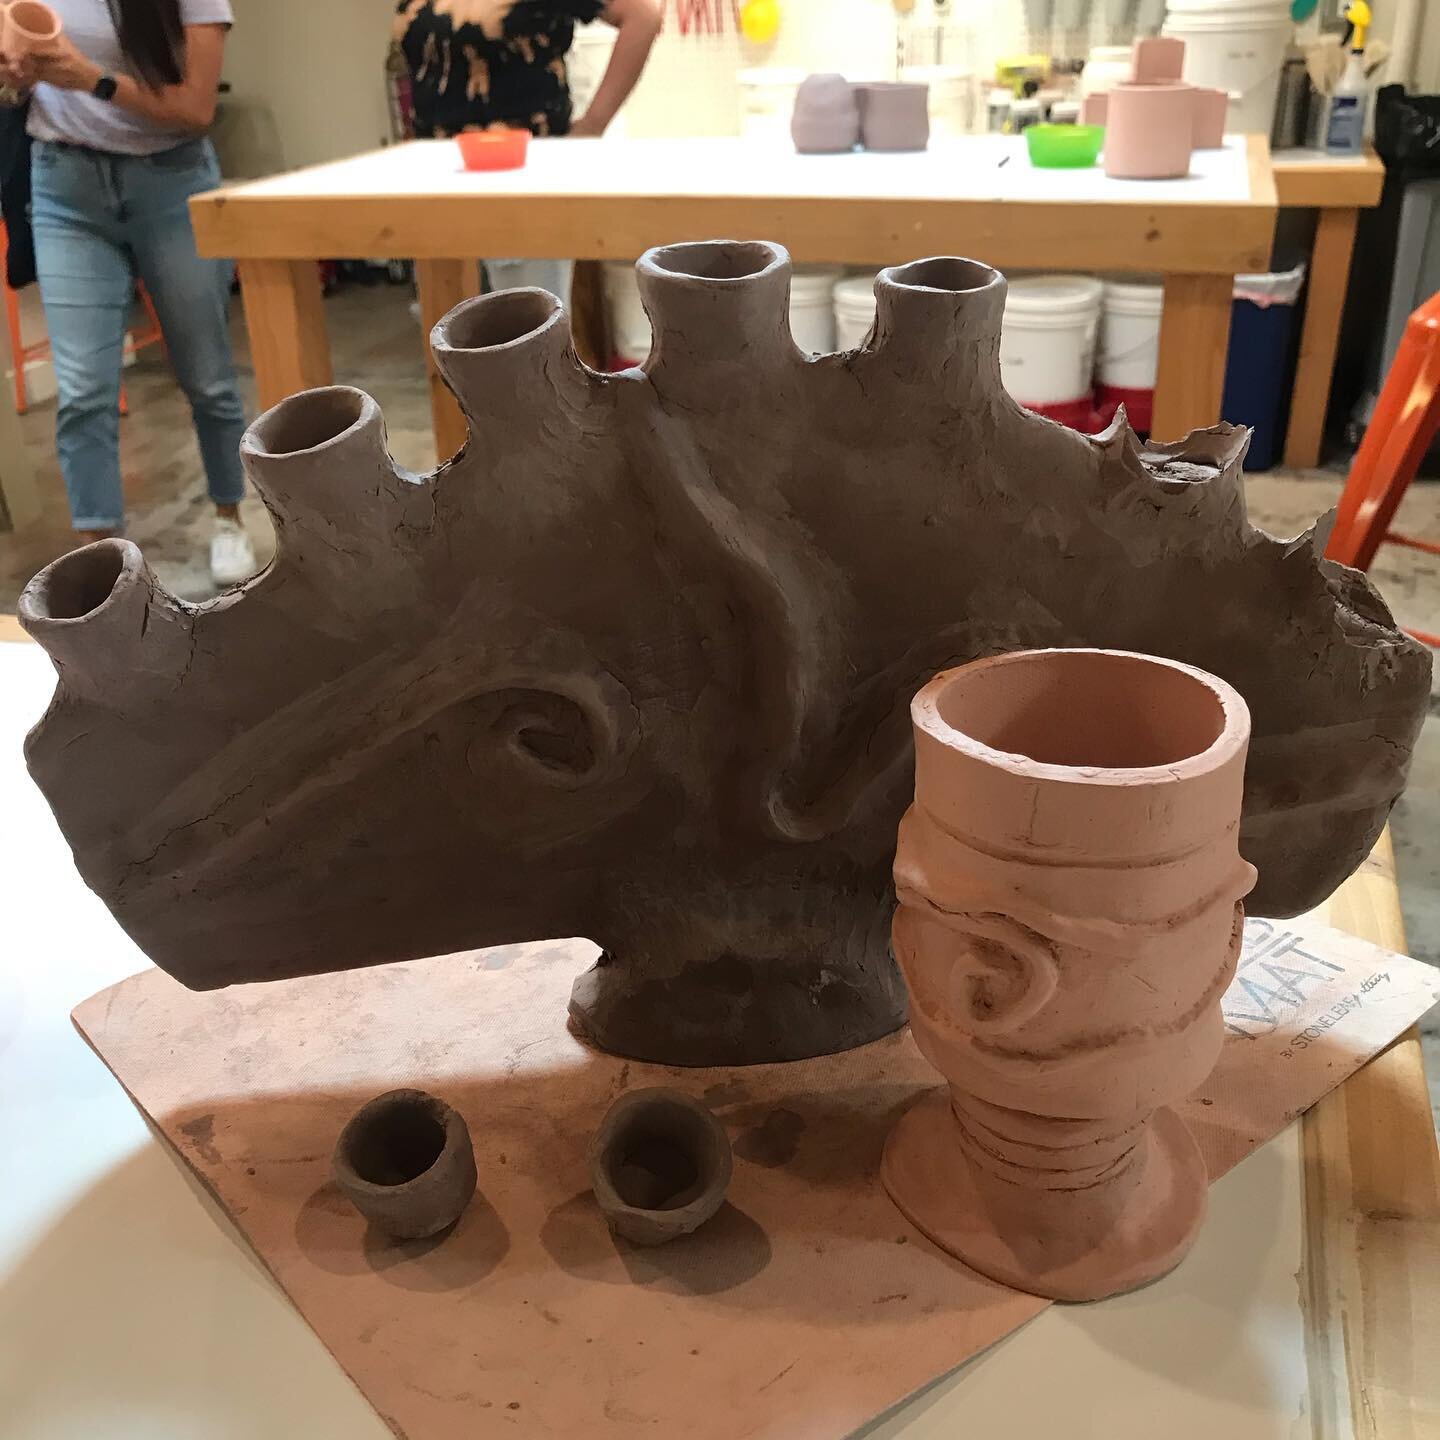 🕯 Ceramic Kinara and Unity Cup: Prototype No. 1
&mdash;&mdash;&mdash;&mdash;&mdash;
The Kinara is being recycled but Unity Cup already survived the kiln and I glazed it today so let&rsquo;s see how she comes out 🤞🏾 @pot_la 
.
.
.
.
.
.
#mxyxdmedia